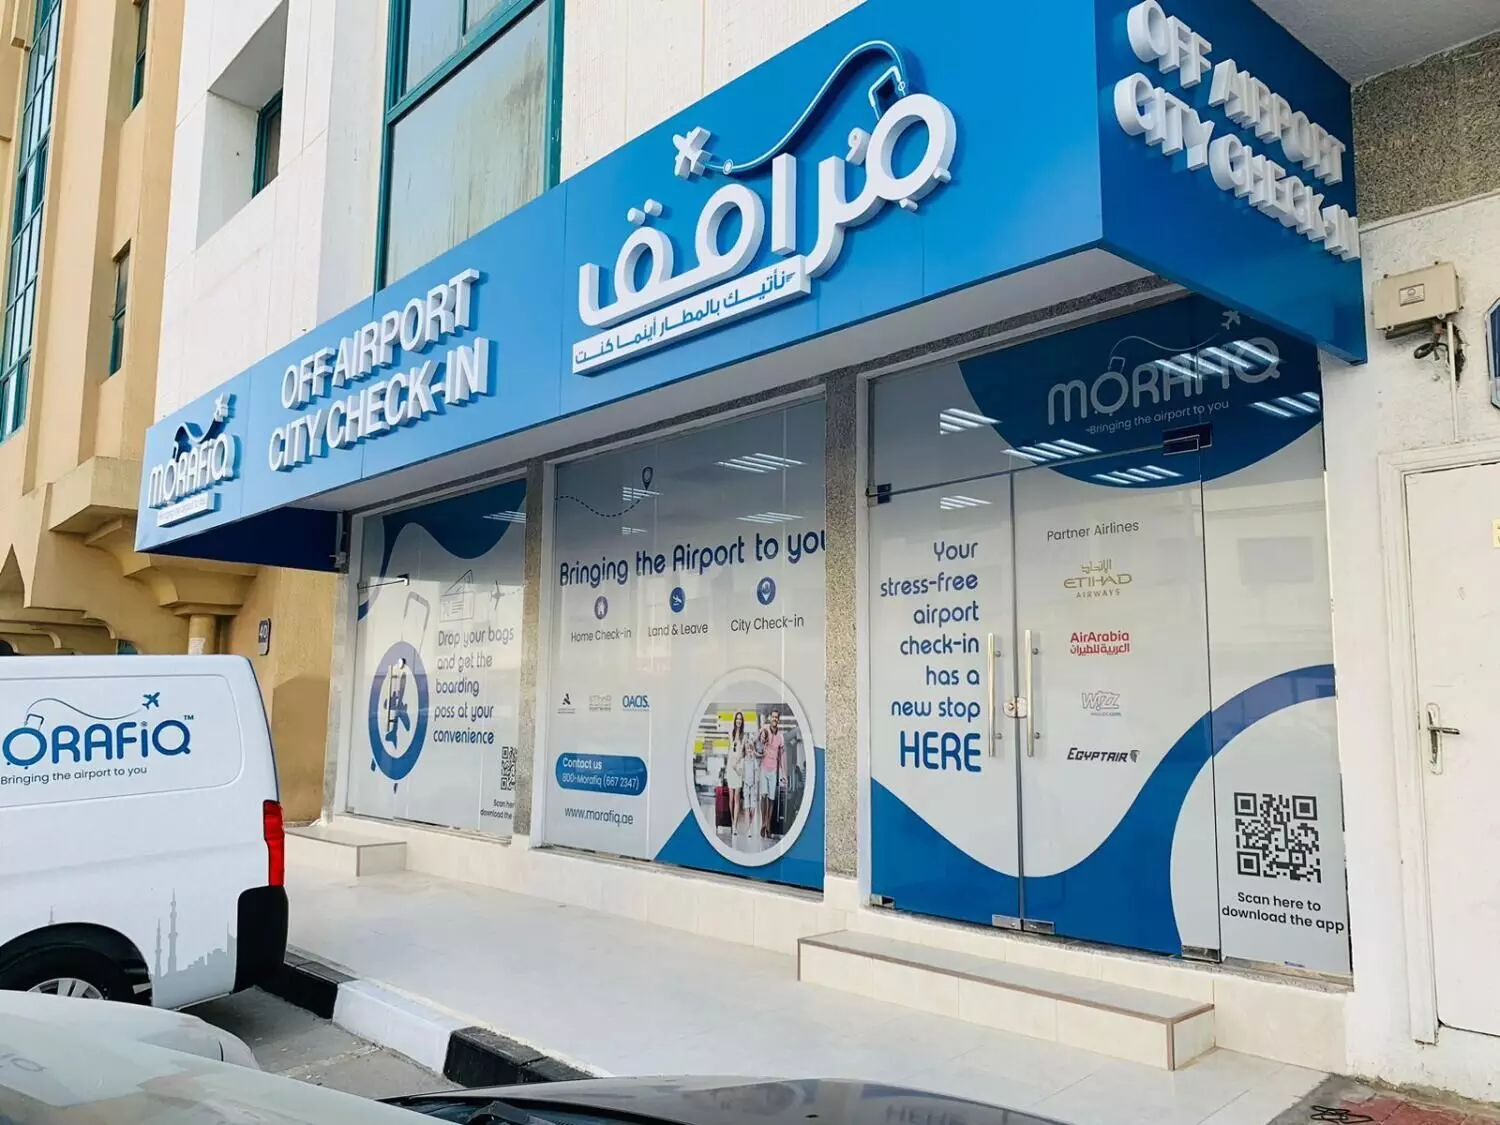 Abu Dhabi airport opens new city check-in service in Mussafah